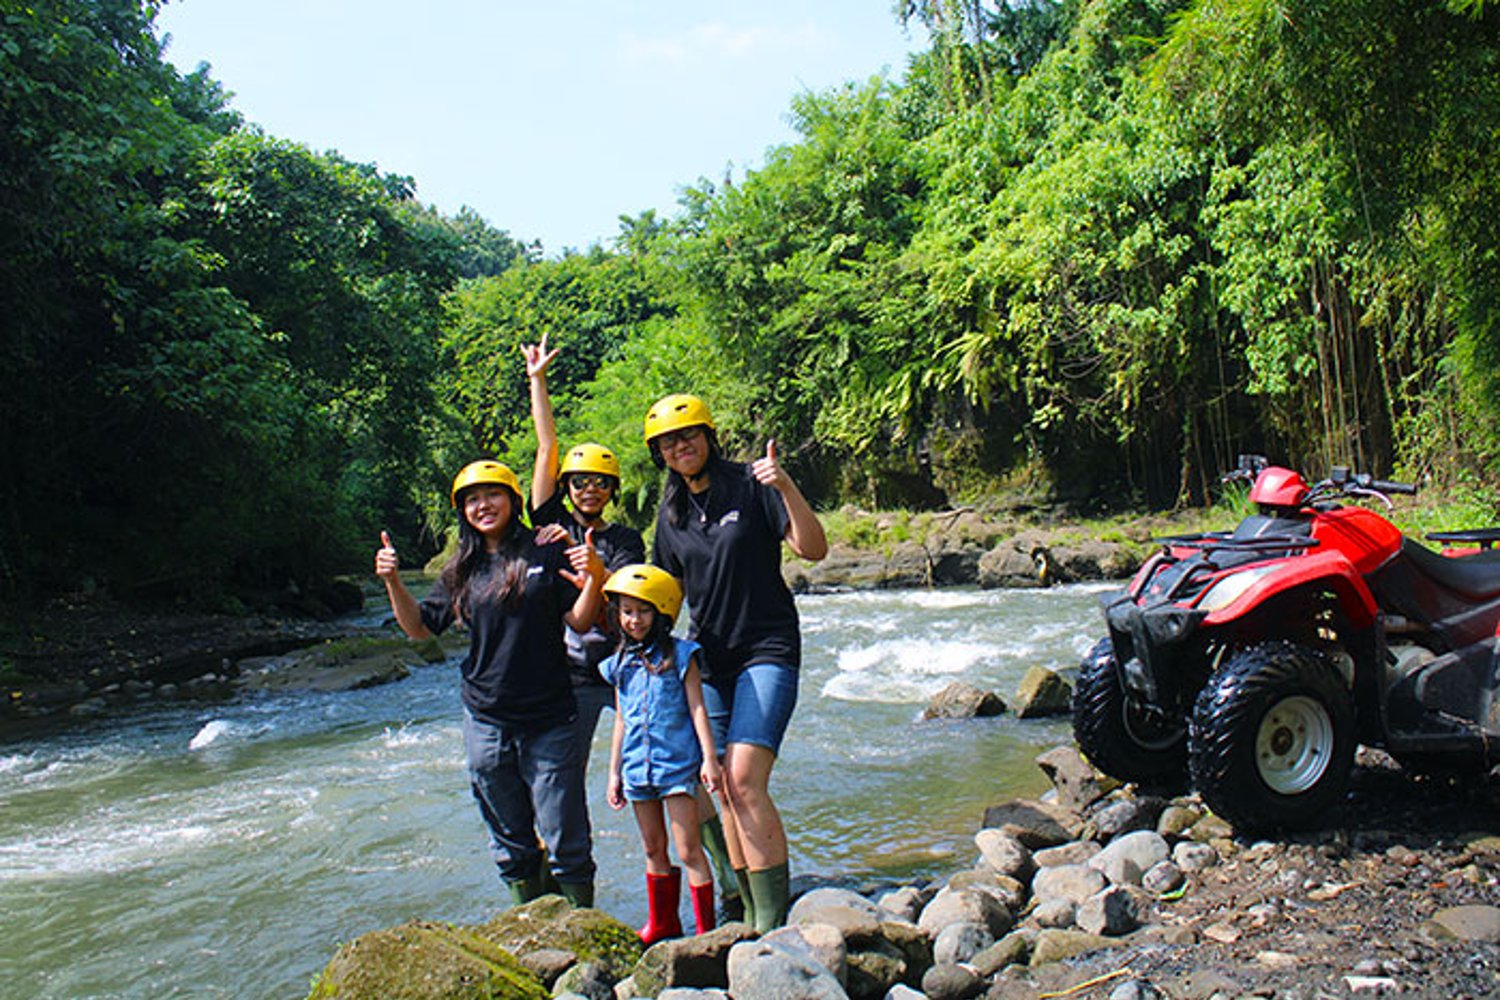 Is Bali Quad Bike Adventure Safe? Find Out It Here!